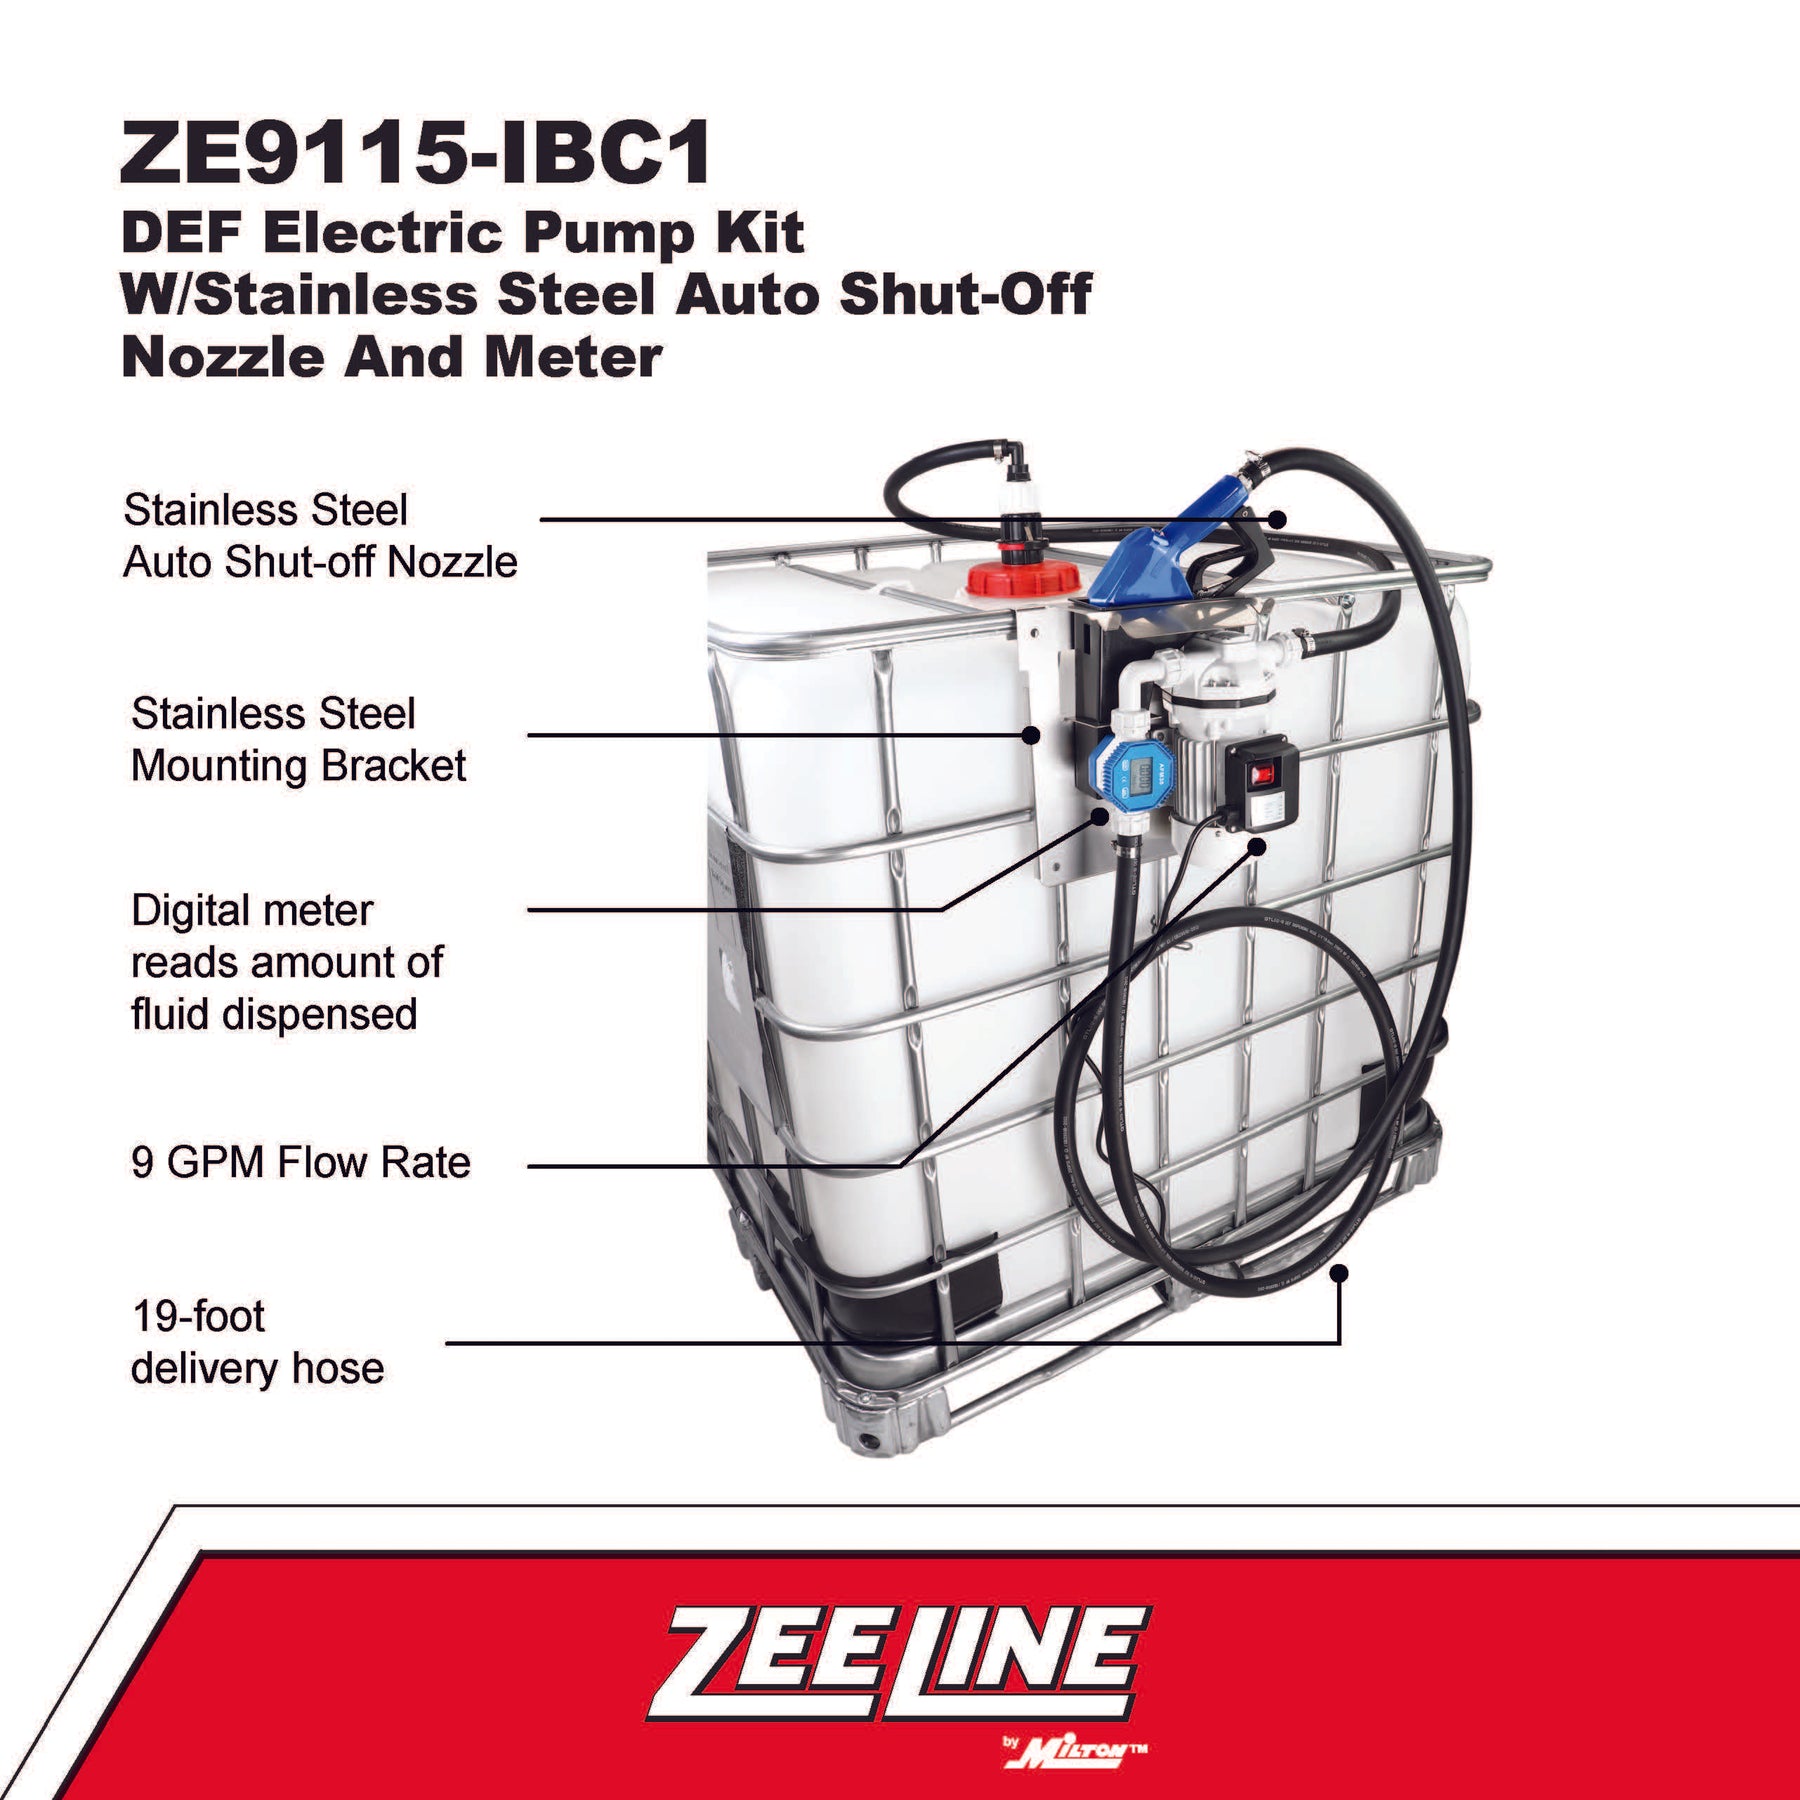 ZE9115-IBC1 - DEF Electric Pump Kit w/Stainless Steel Auto Shut-Off No